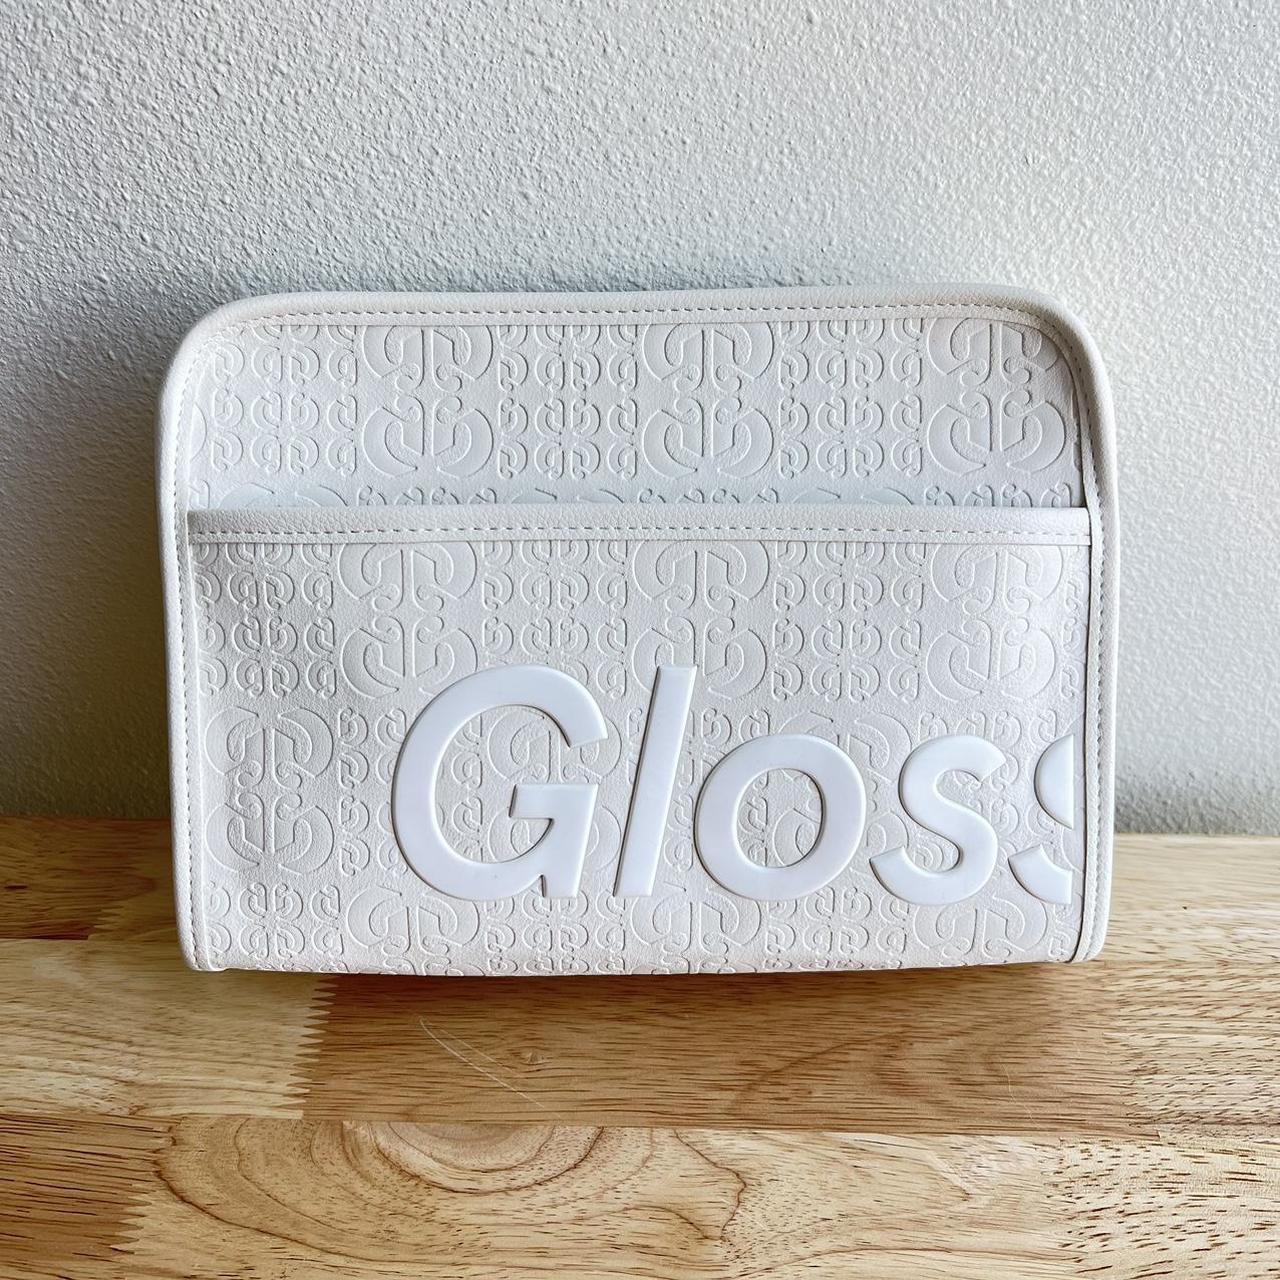 GLOSSIER: White Beauty Bag
Limited Edition, sold...